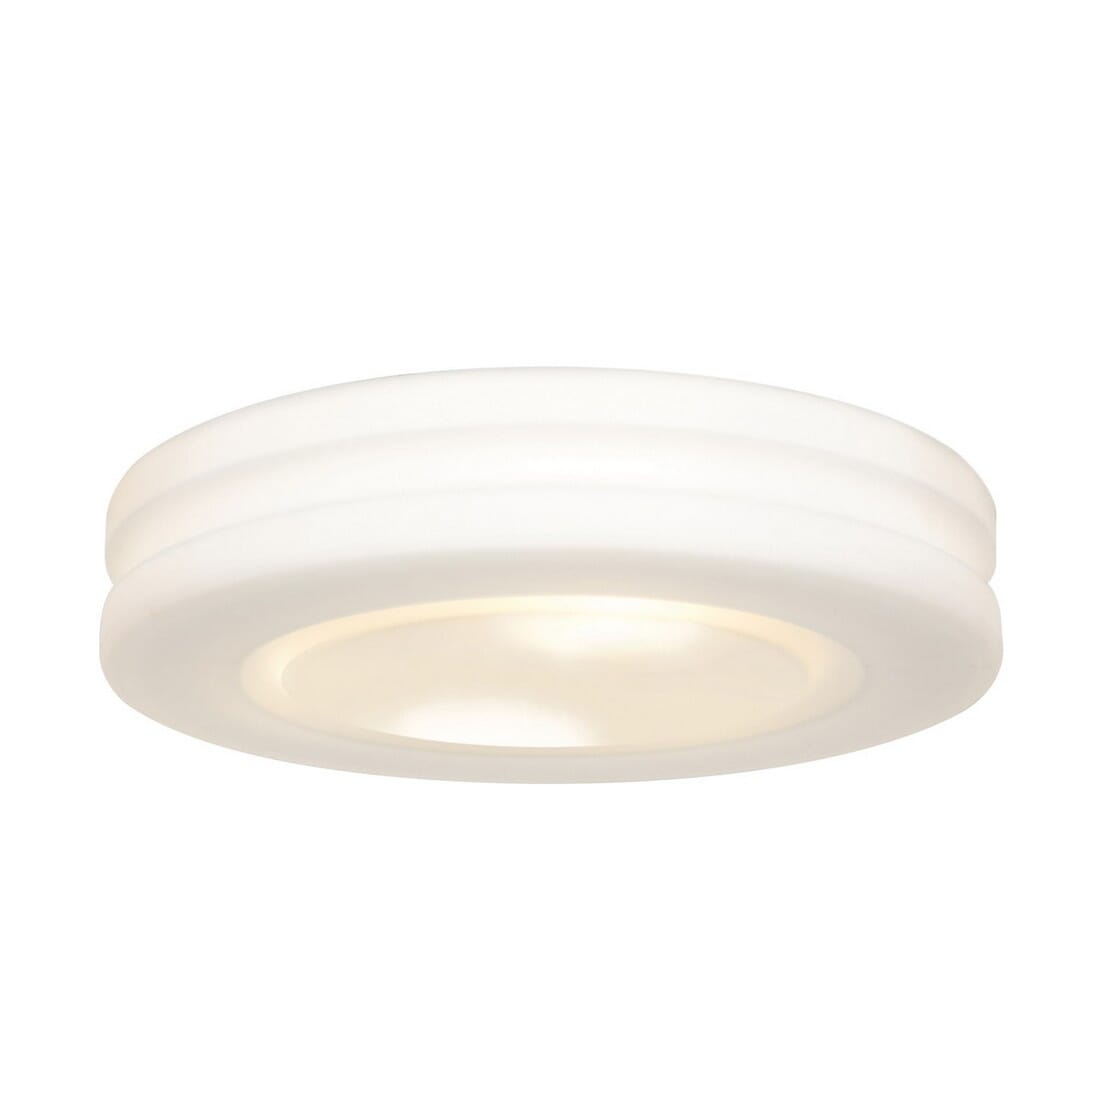 Access Altum 2-Light Ceiling Light in White -  Access Lighting, 50187-WH/OPL